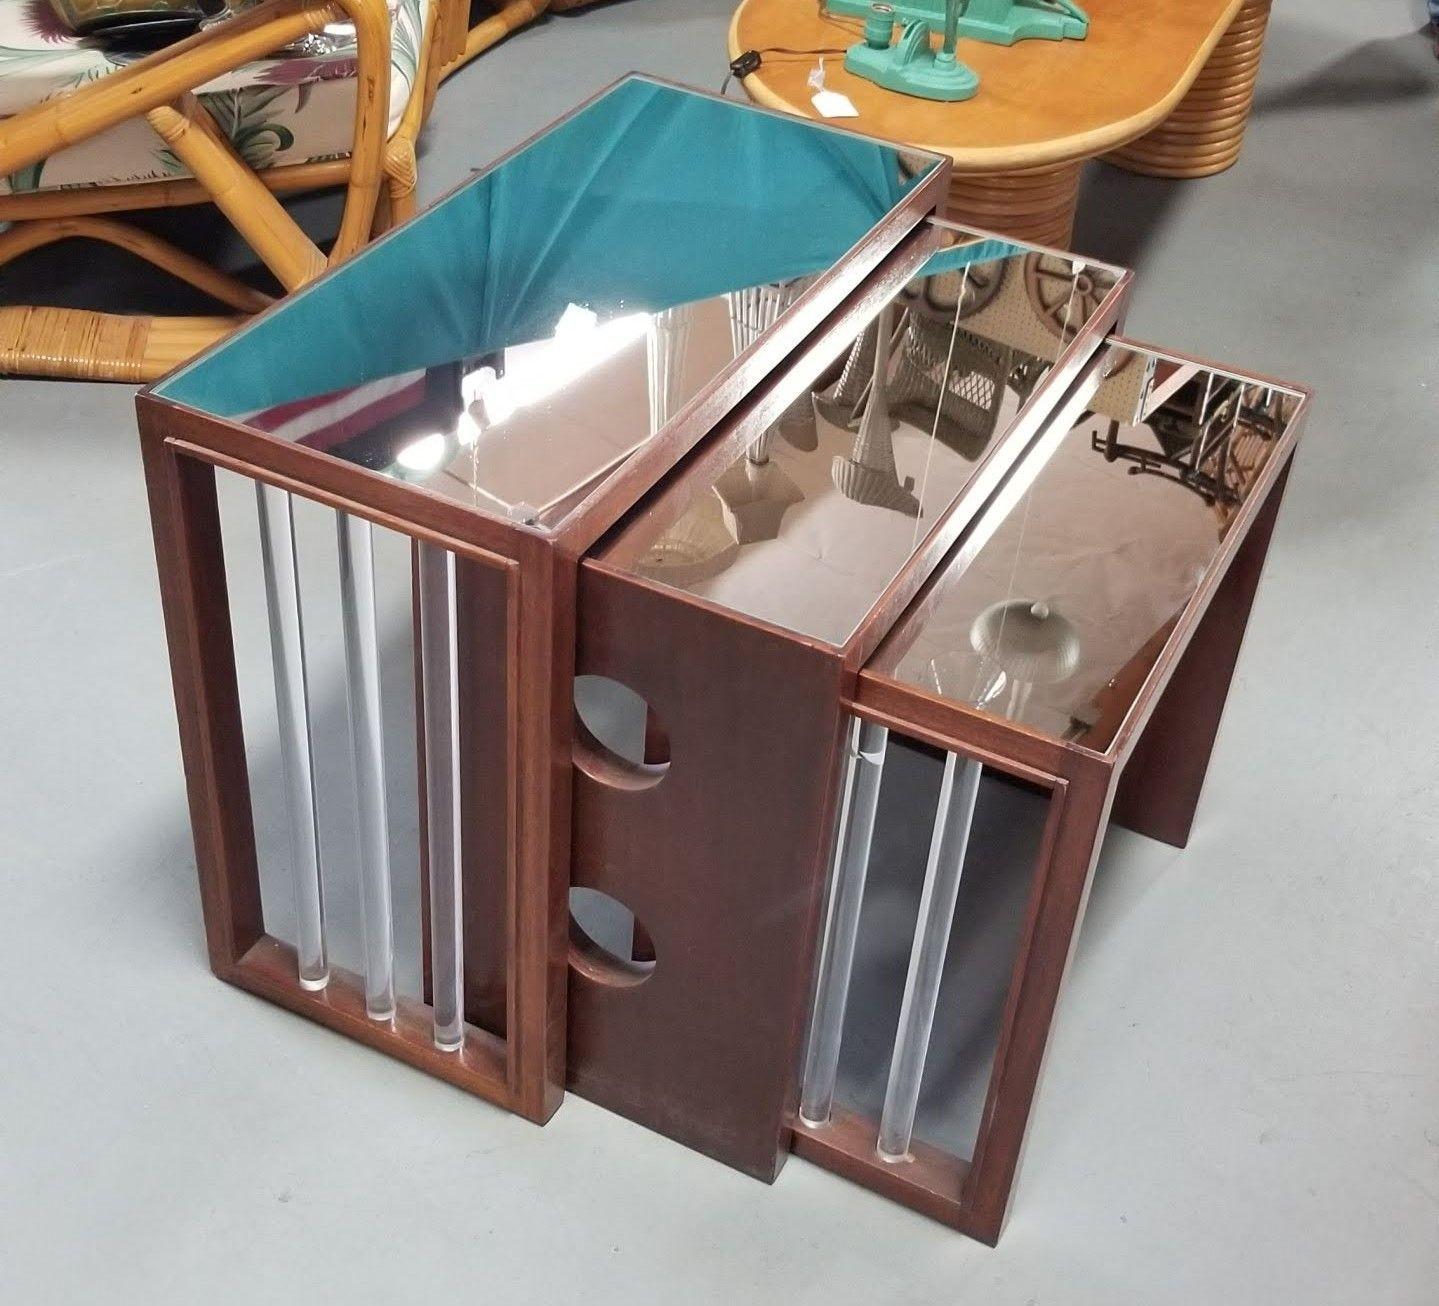 Vintage Art Deco James Mont style Nesting Tables In Excellent Condition For Sale In Van Nuys, CA